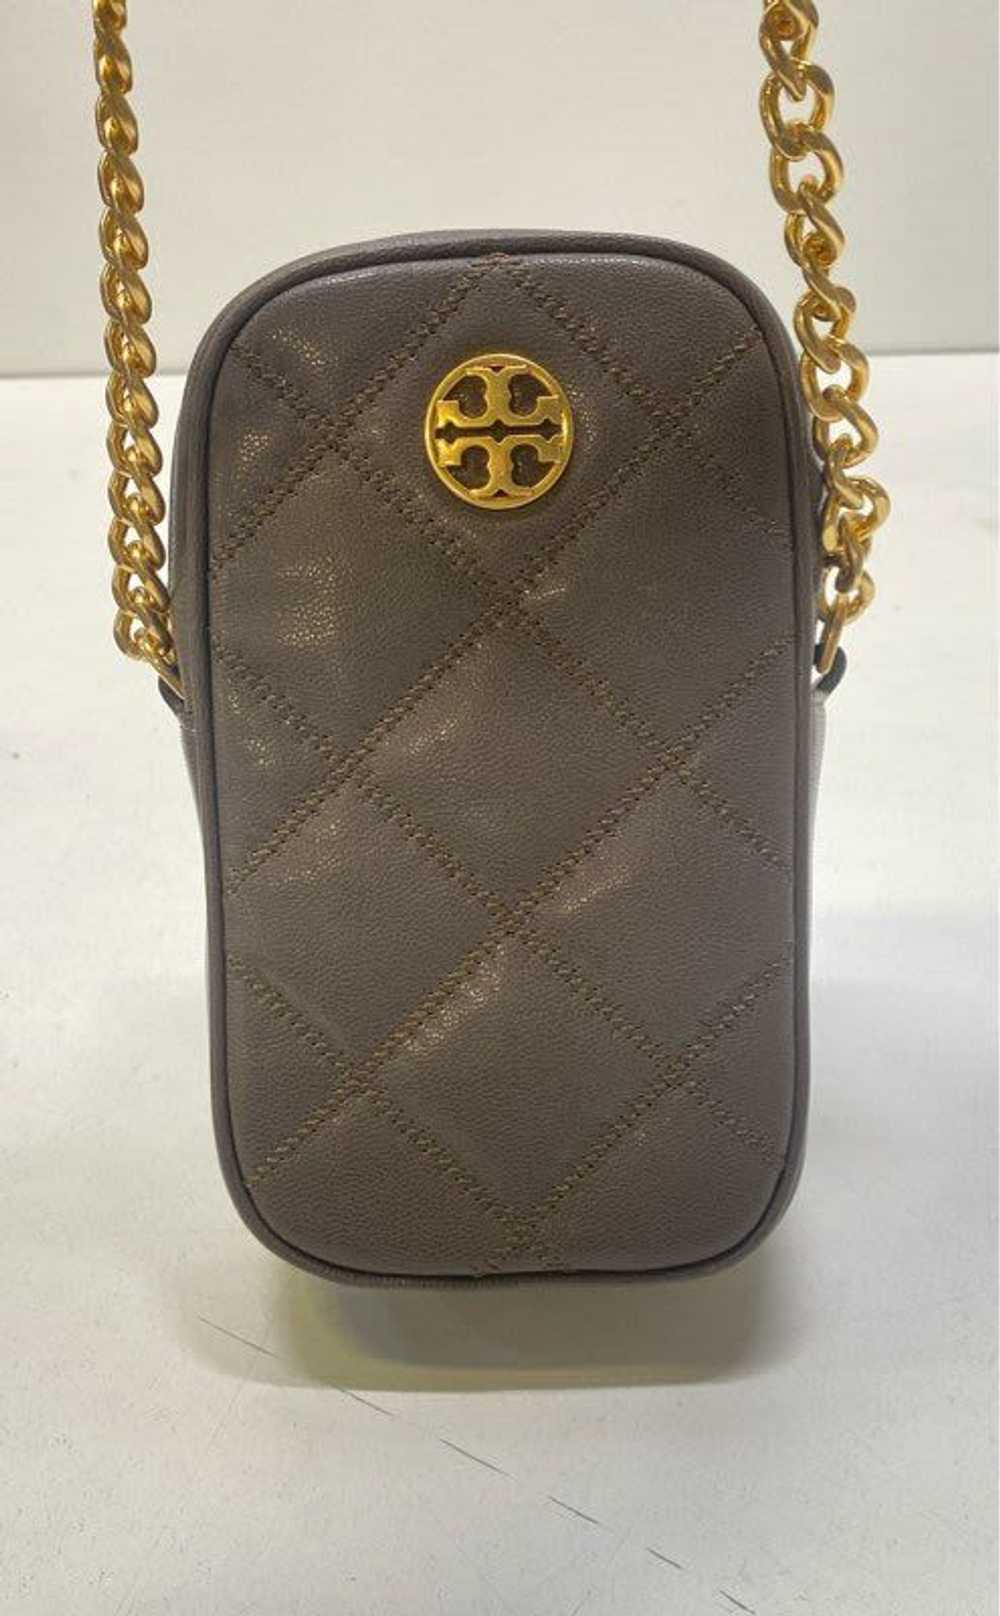 Tory Burch Leather Quilted Phone Crossbody Taupe - image 1